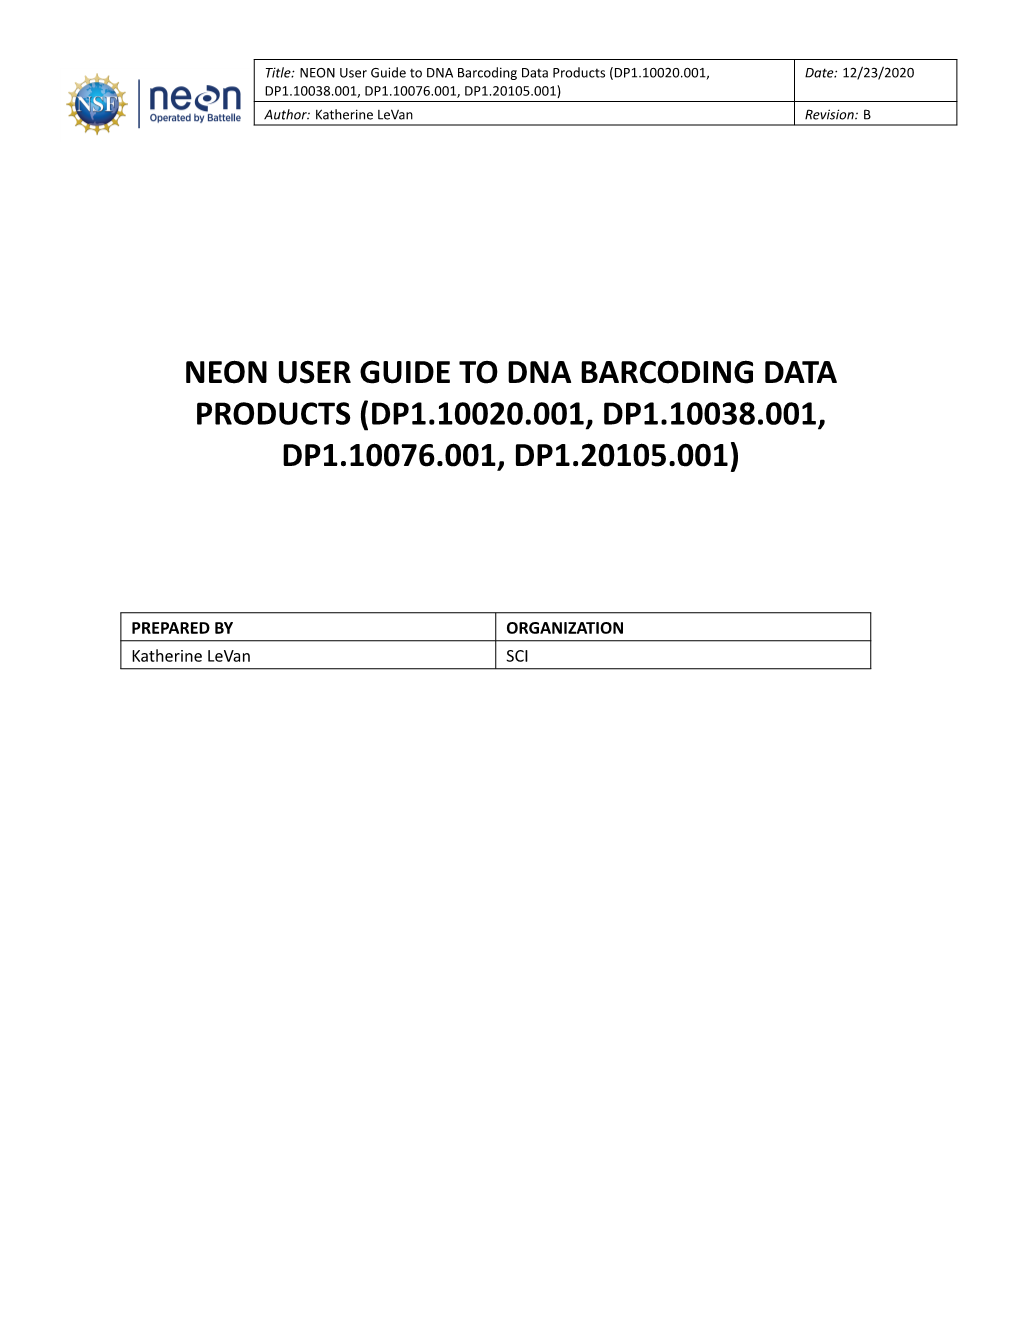 Neon User Guide to Dna Barcoding Data Products (Dp1.10020.001, Dp1.10038.001, Dp1.10076.001, Dp1.20105.001)